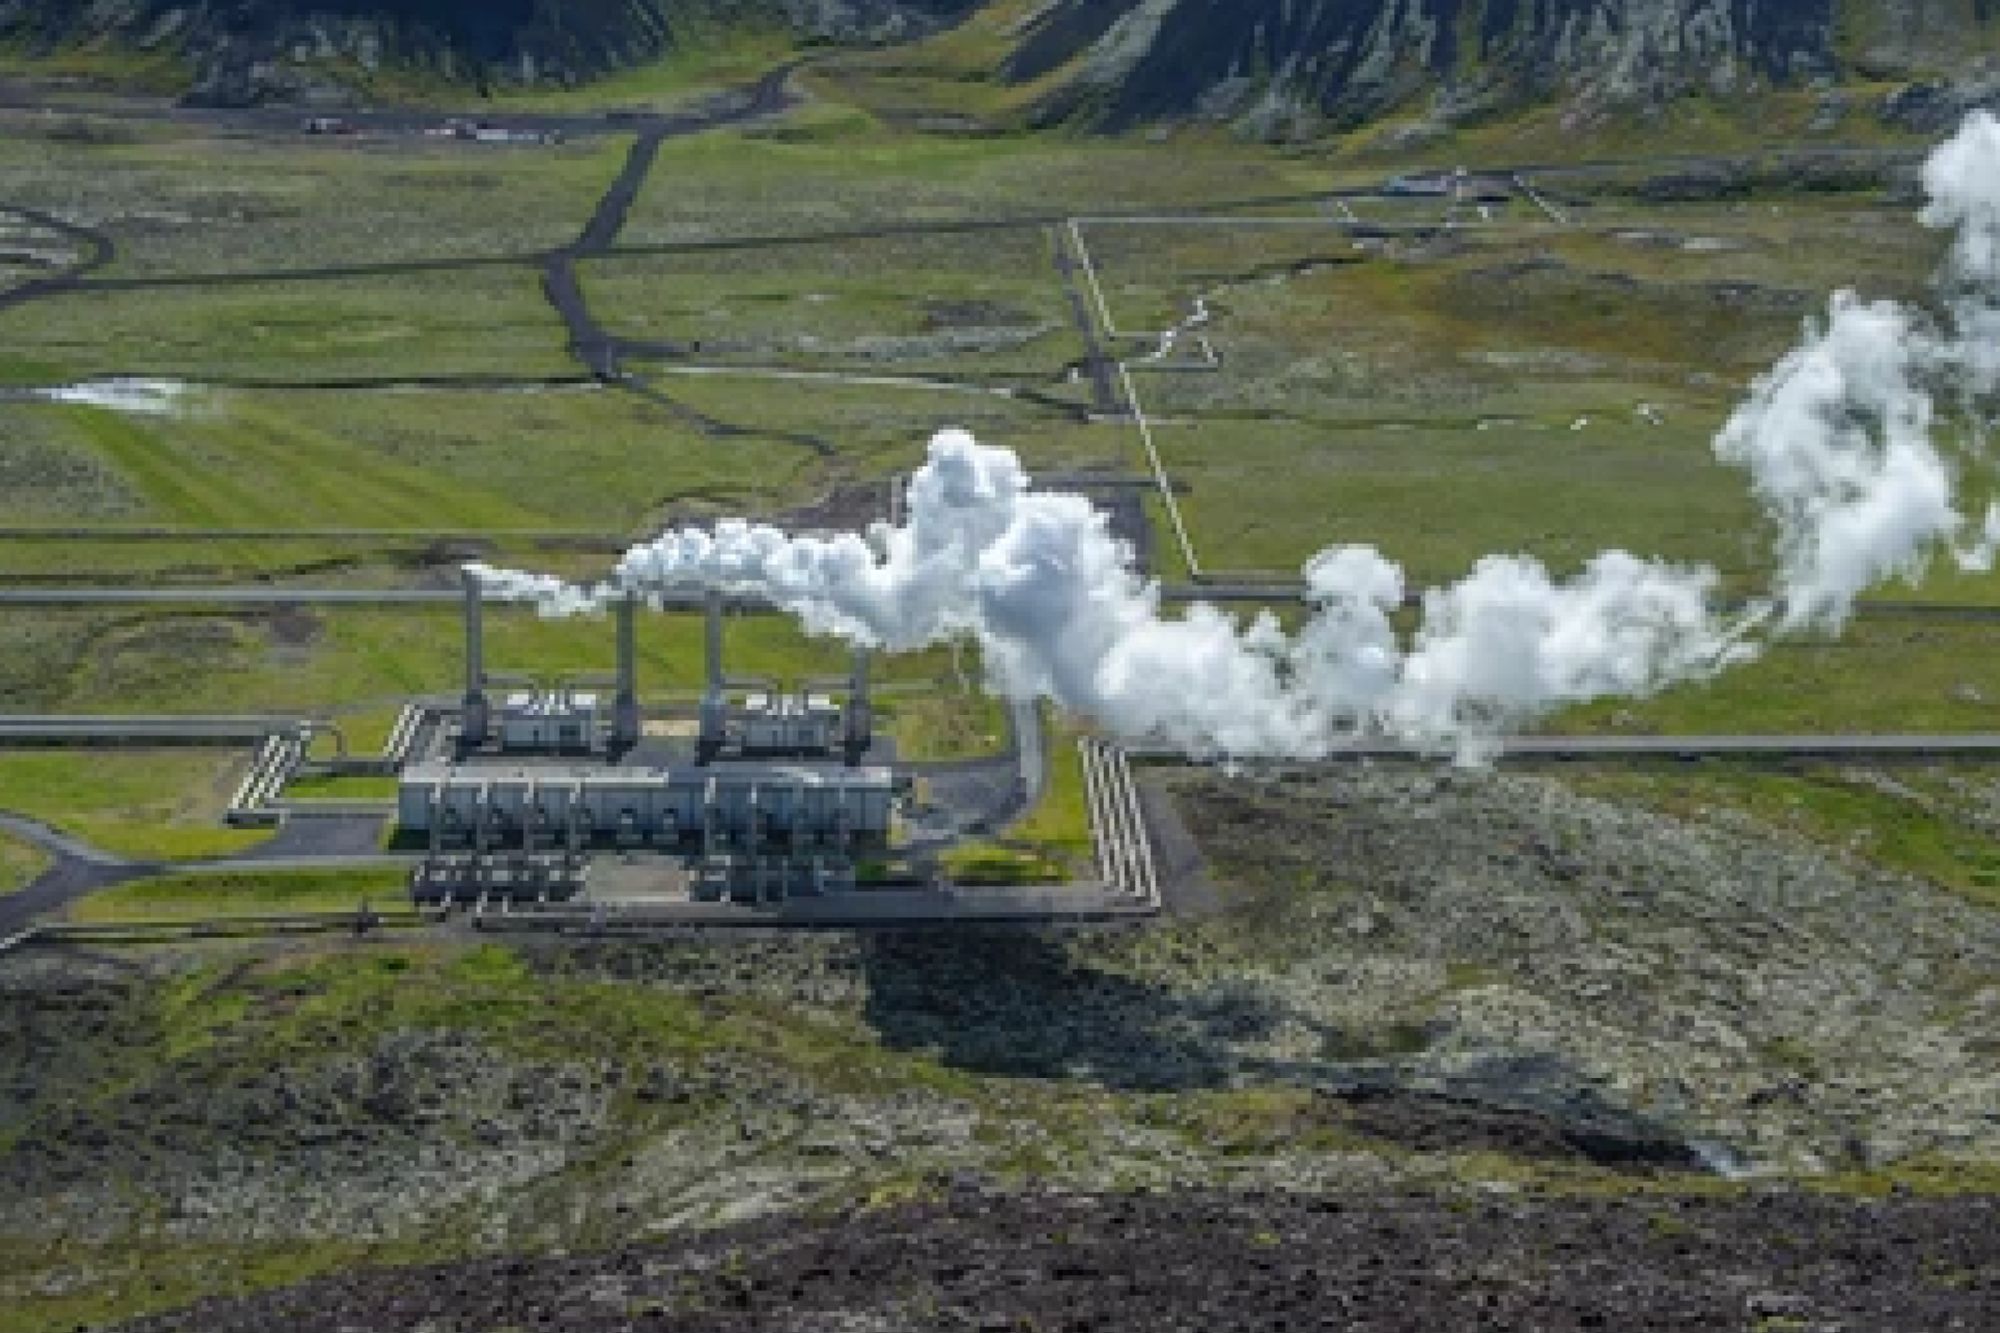 New corrosion solutions paving way for enhanced geothermal power plant efficiency